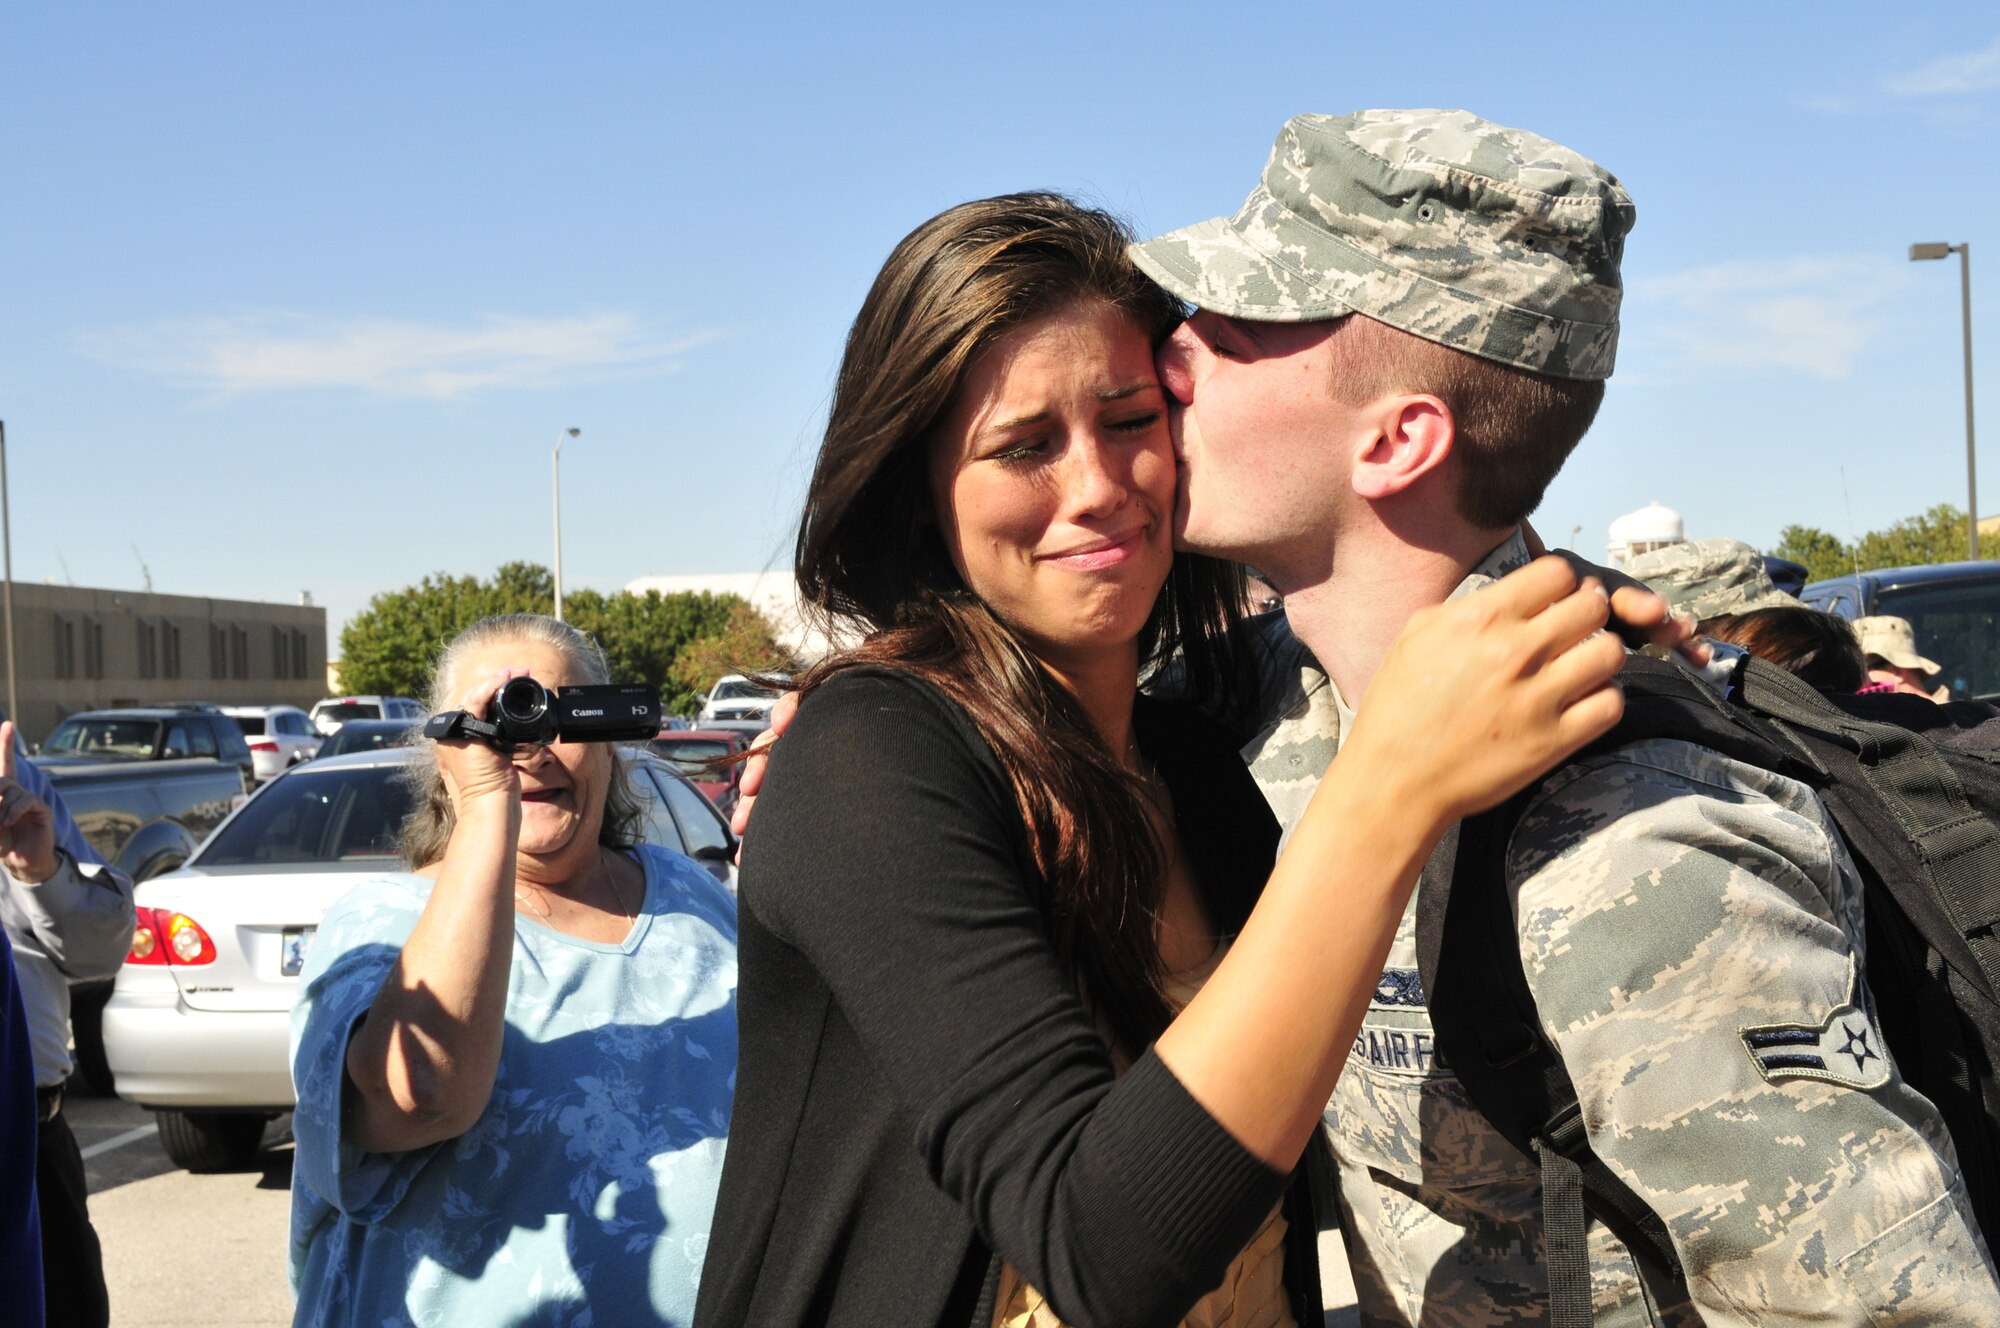 Airman 1st Class Clint Grunalt, who performs hydraulic maintenance on the E-3 “Sentry” Airborne Warning and Control System aircraft for the 552nd Aircraft Maintenance Squadron, kisses his wife, Sarah, soon after returning to Tinker Air Force Base Wednesday from a six-month deployment to Southwest Asia with about 135 other fellow Airmen, primarily from the 963rd Airborne Air Control Squadron. Also attending the homecoming were Airman Grunalt’s parents, John and Dawn Grunalt, and his sister, Ashlynn, who drove all the way from Sterling Heights, Mich., to welcome home their son and brother. Airman Grunalt’s grandmother, Mary Jo, made the trip from Amarillo, Texas, as well. Also on hand were a host of Airman Grunalt’s in-laws from Warr Acres, as well as several friends. (Air Force photo by Darren Heusel)